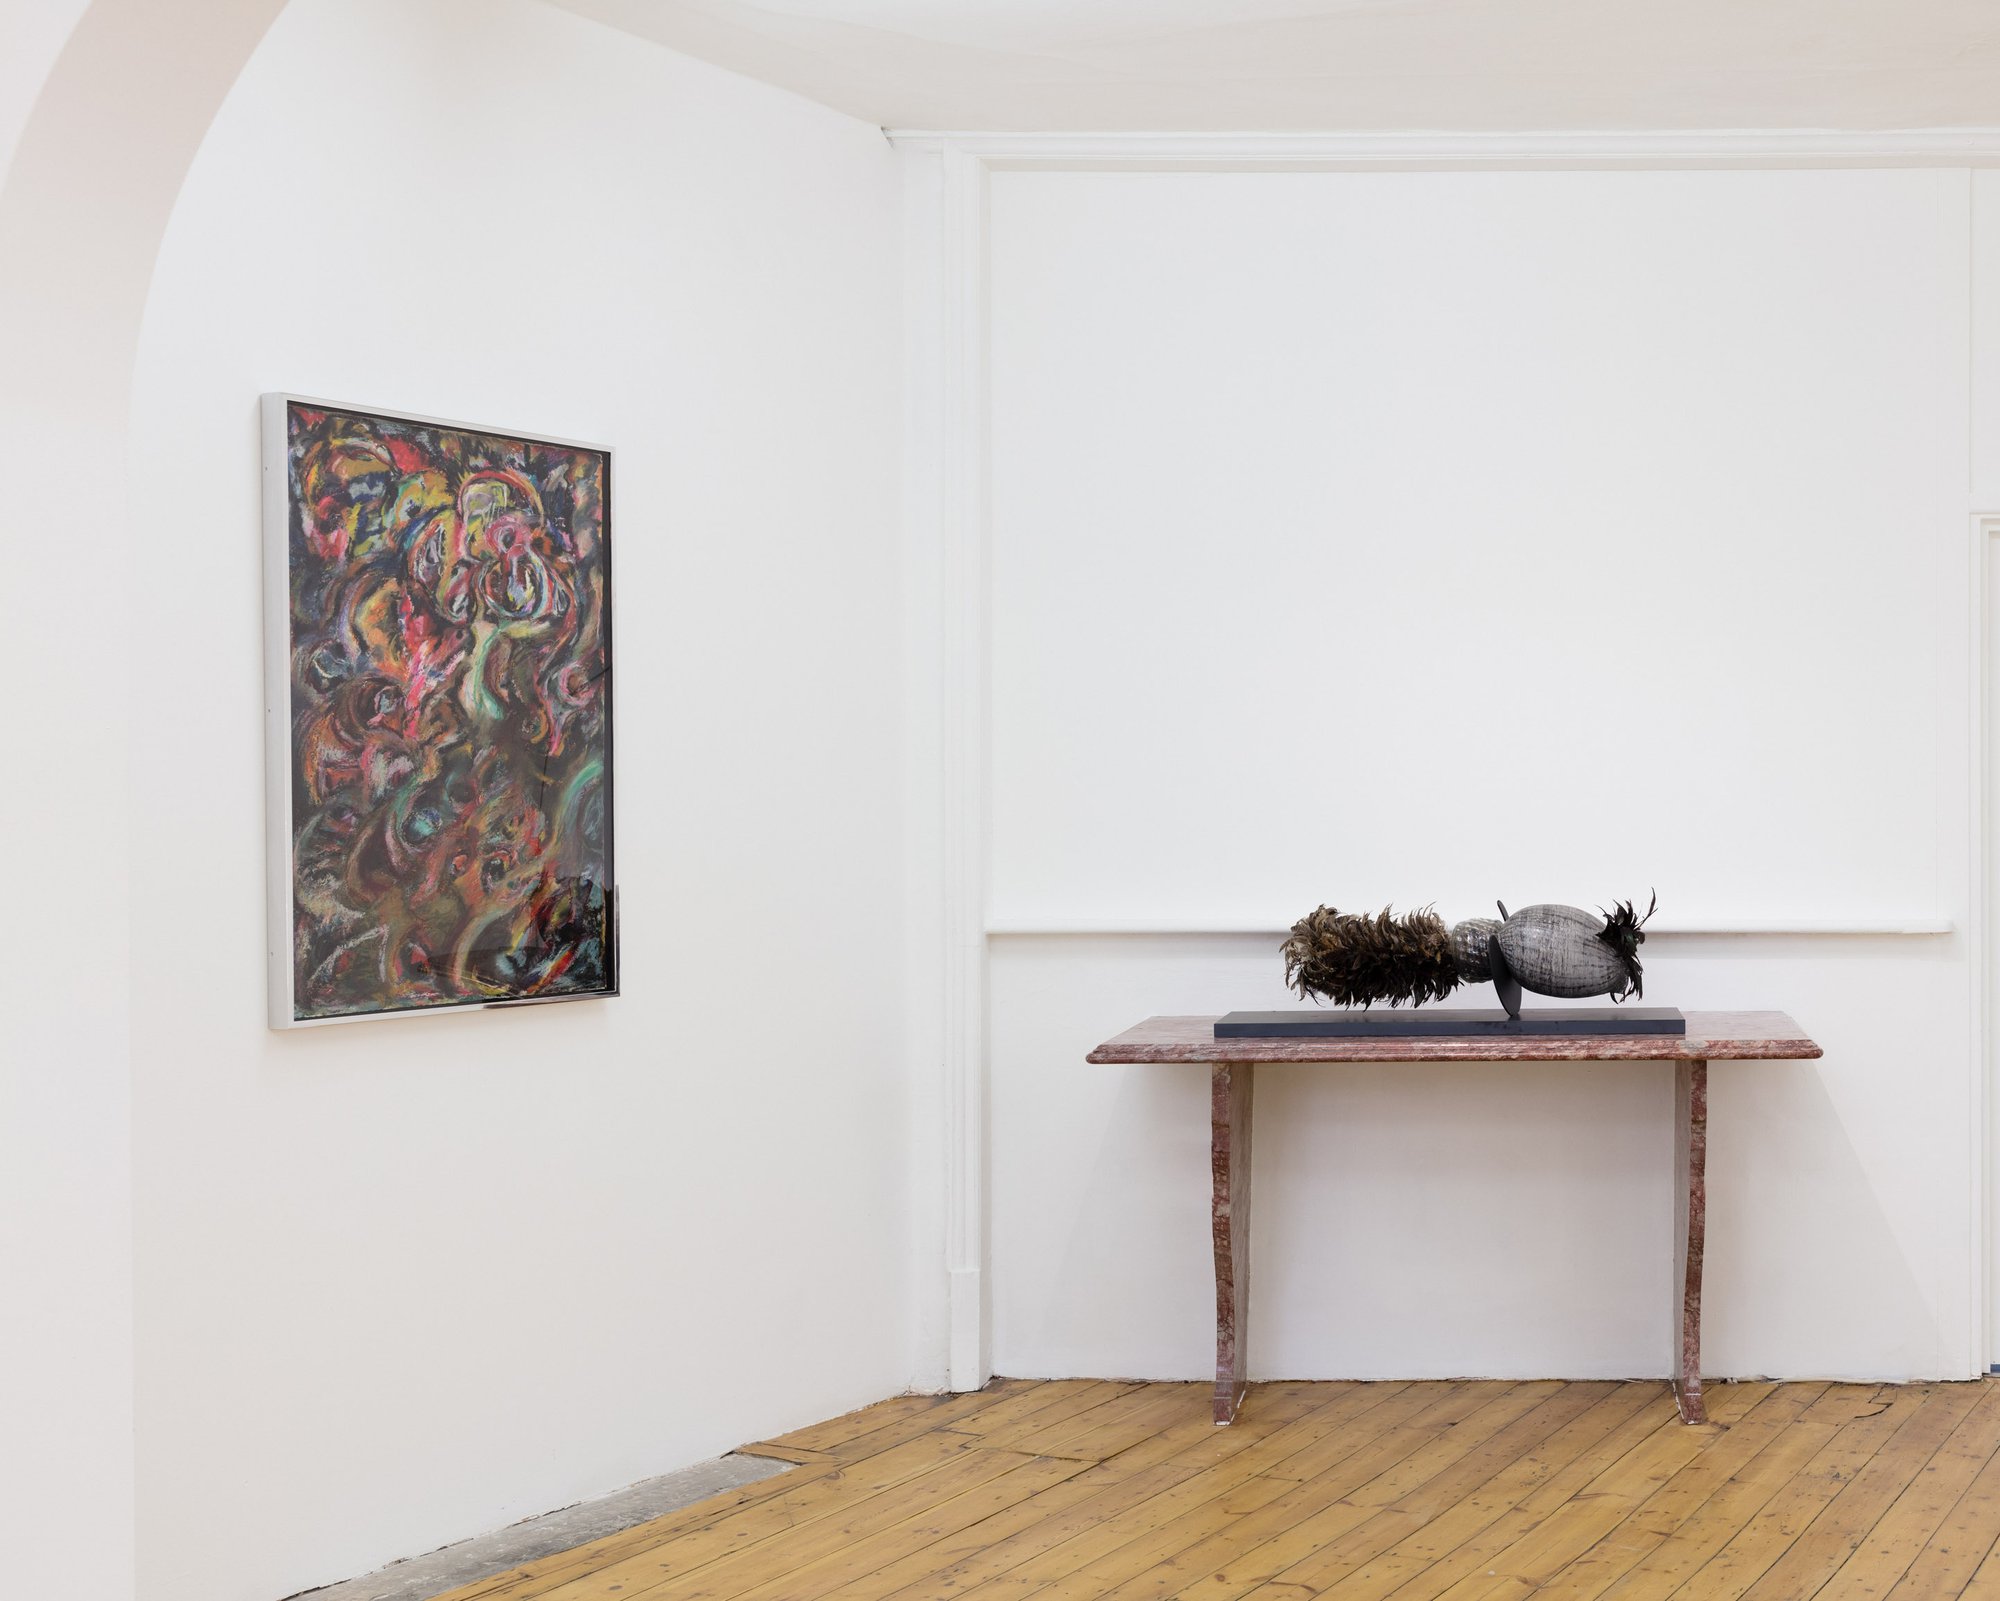 Installation view, Liliane Lijn, Lady of the Wild Things, Rodeo, London, 2018